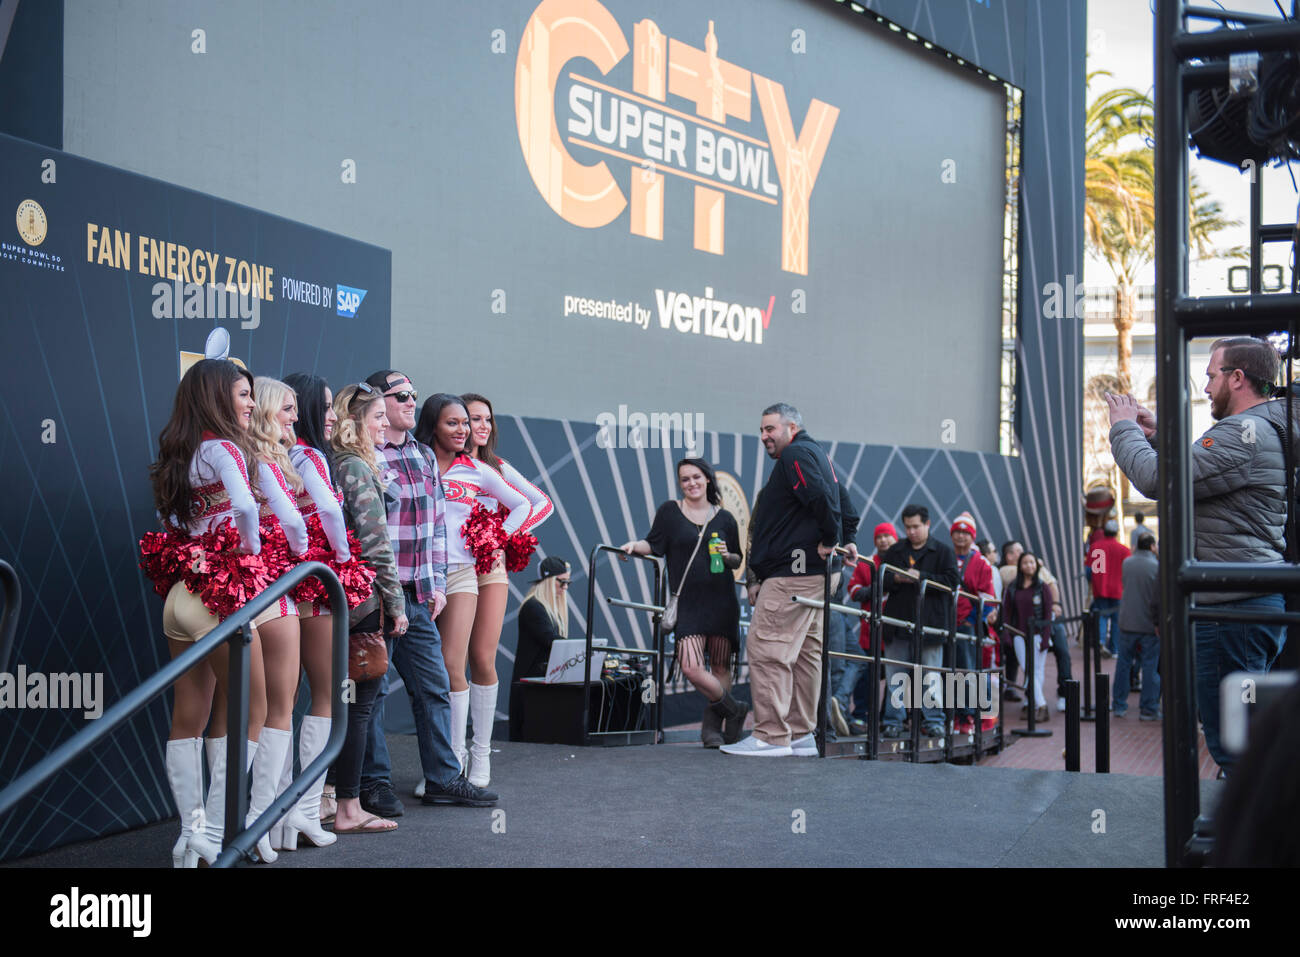 People having photographs taken with Cheerleaders at Super Bowl City in San Francisco before the 2016 Superbowl. California, USA Stock Photo